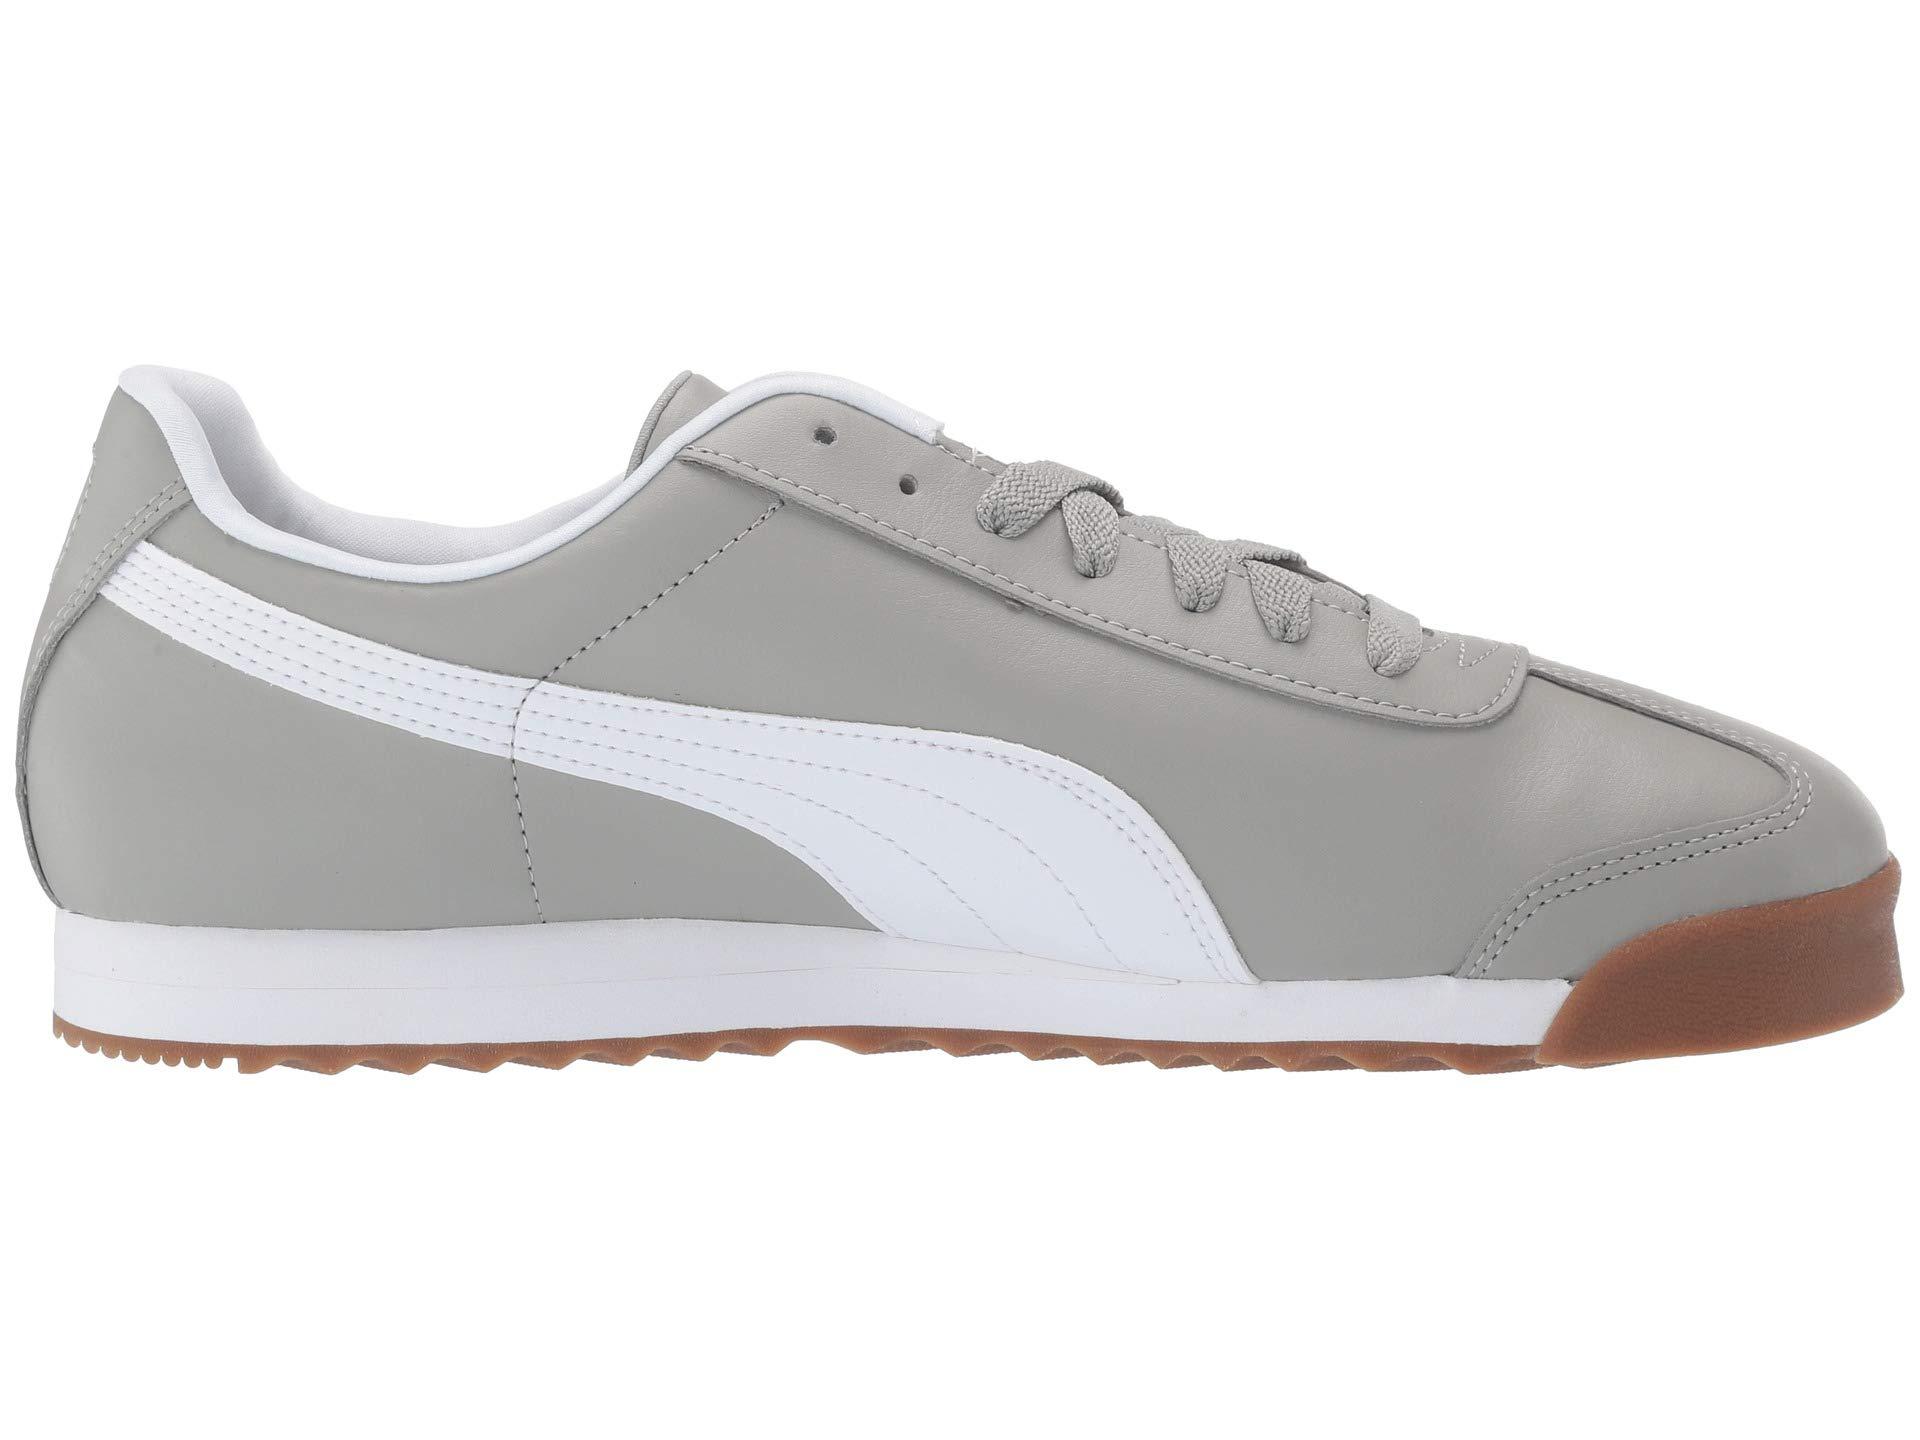 PUMA Synthetic Roma Basic (limestone/ White) Shoes in Gray for Men - Lyst